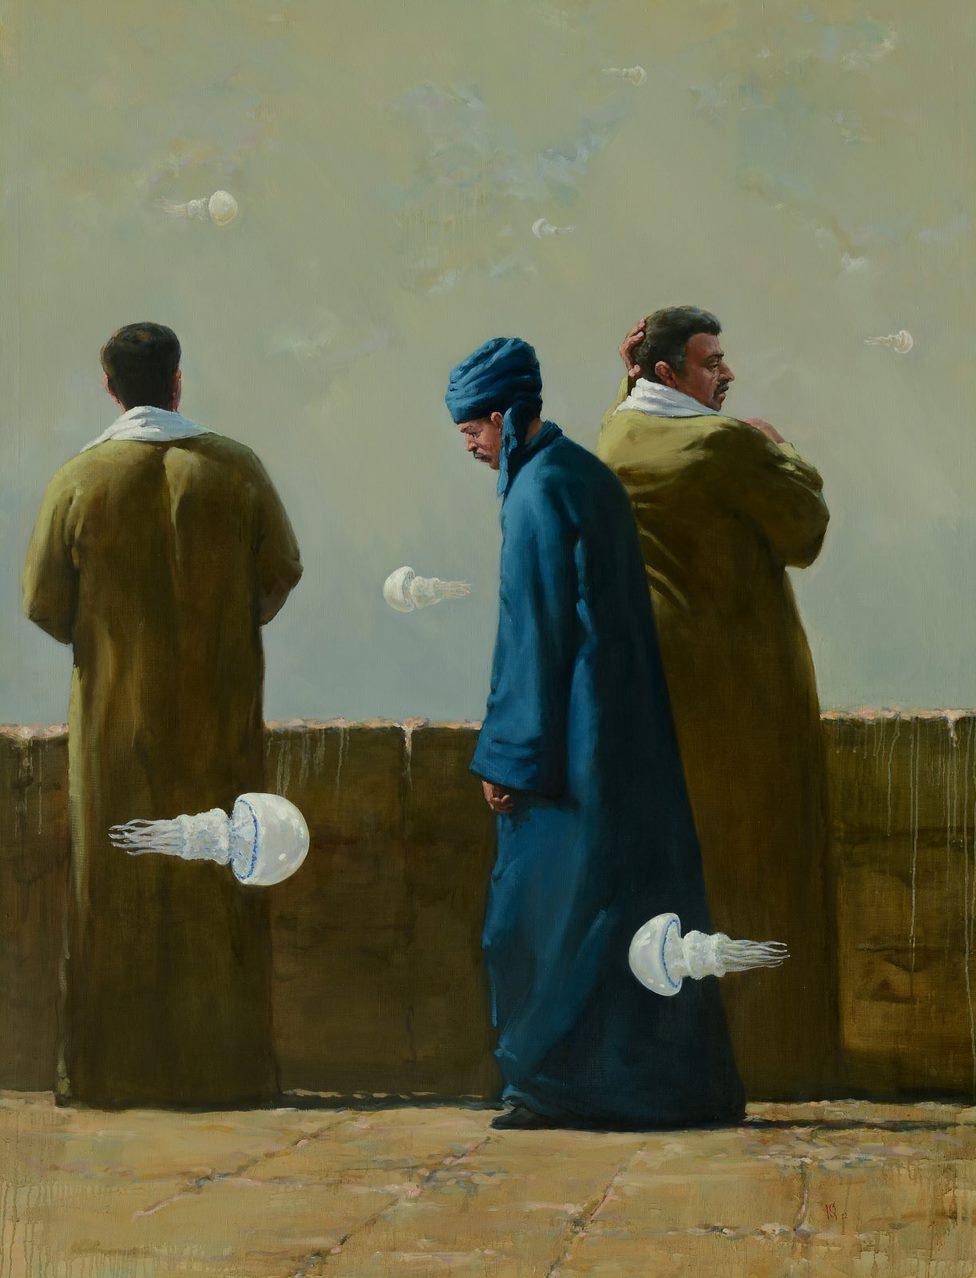 Oleg Kateryniuk Figurative Painting - Dust of Civilization, Figurative Surrealism Original oil Painting, Ready to Hang